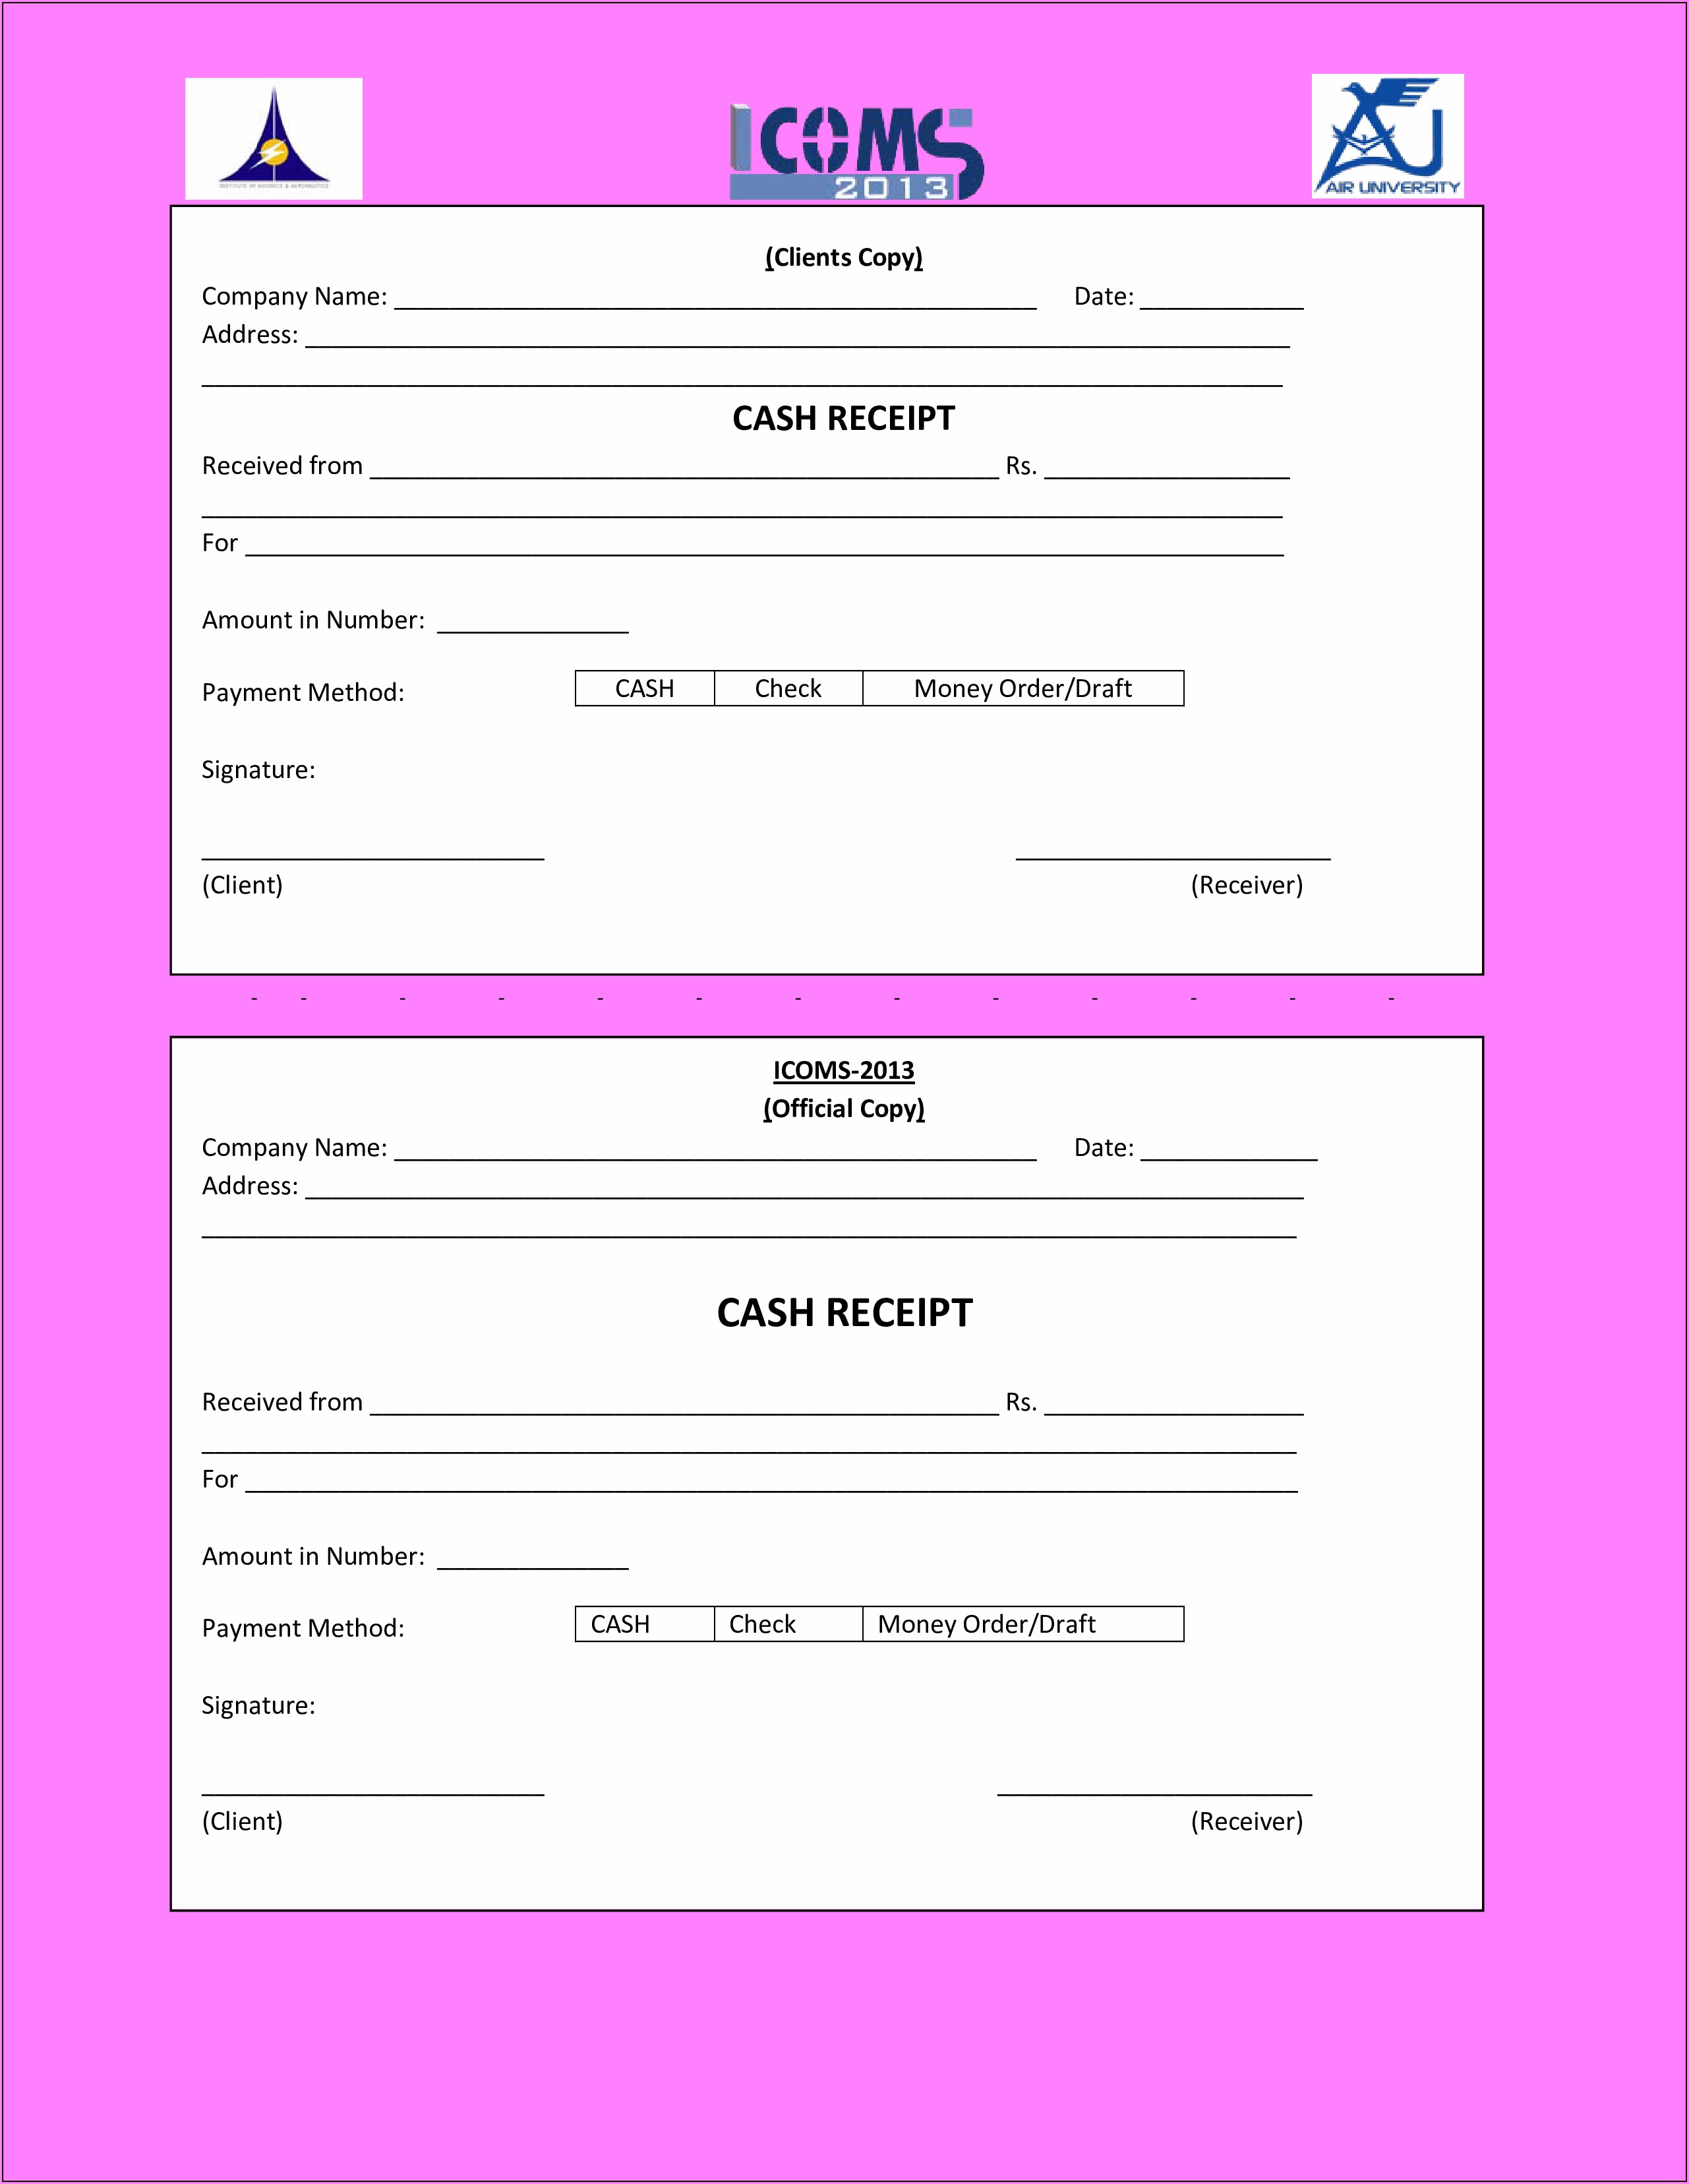 free-cash-receipt-template-word-template-1-resume-examples-0g27pmn9pr